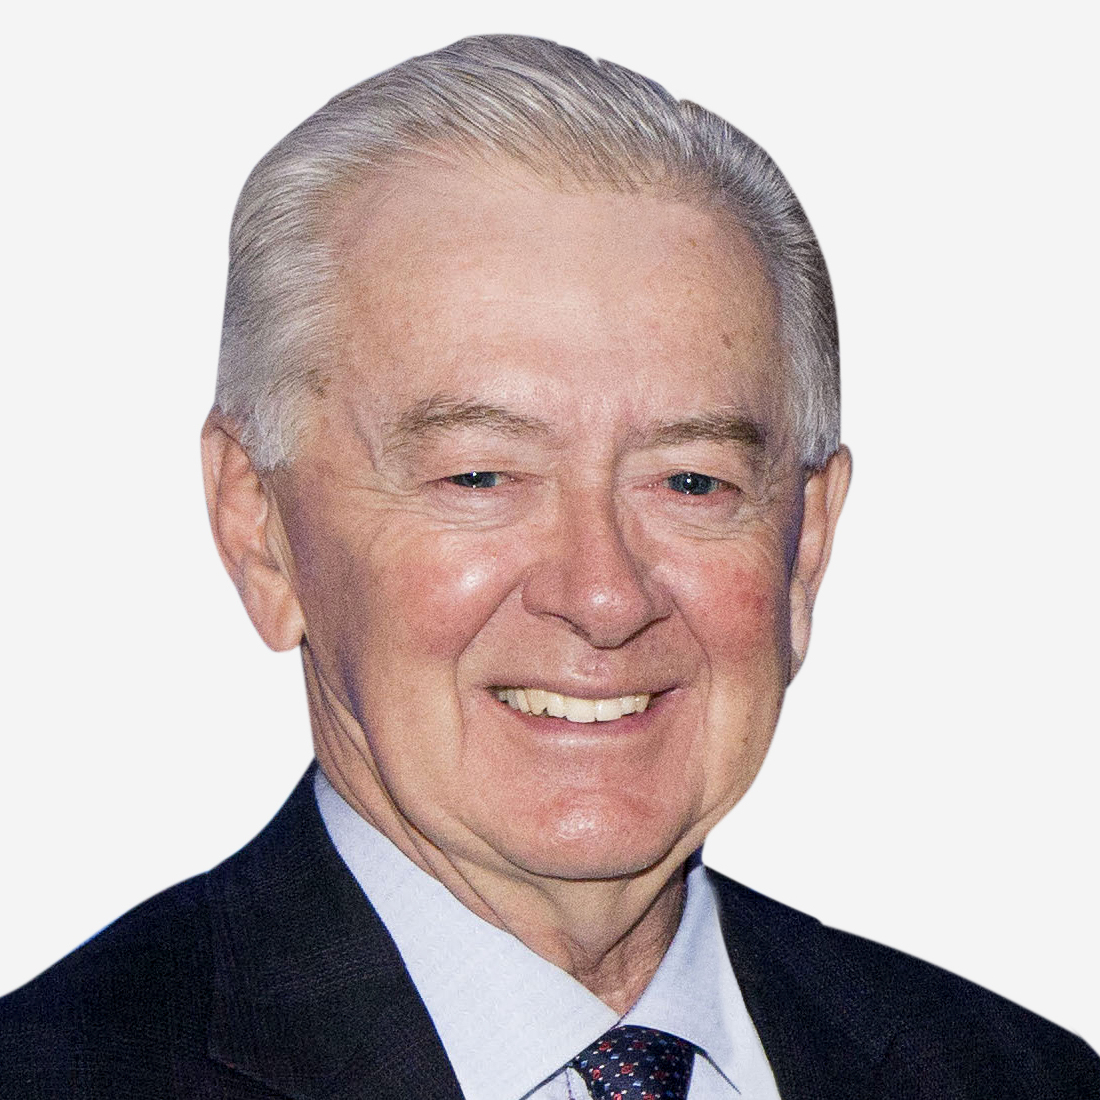 A photo of Preston Manning, author, founder of the Reform Party of Canada and the Canadian Reform Conservative Alliance, and former member of Canadian Parliament